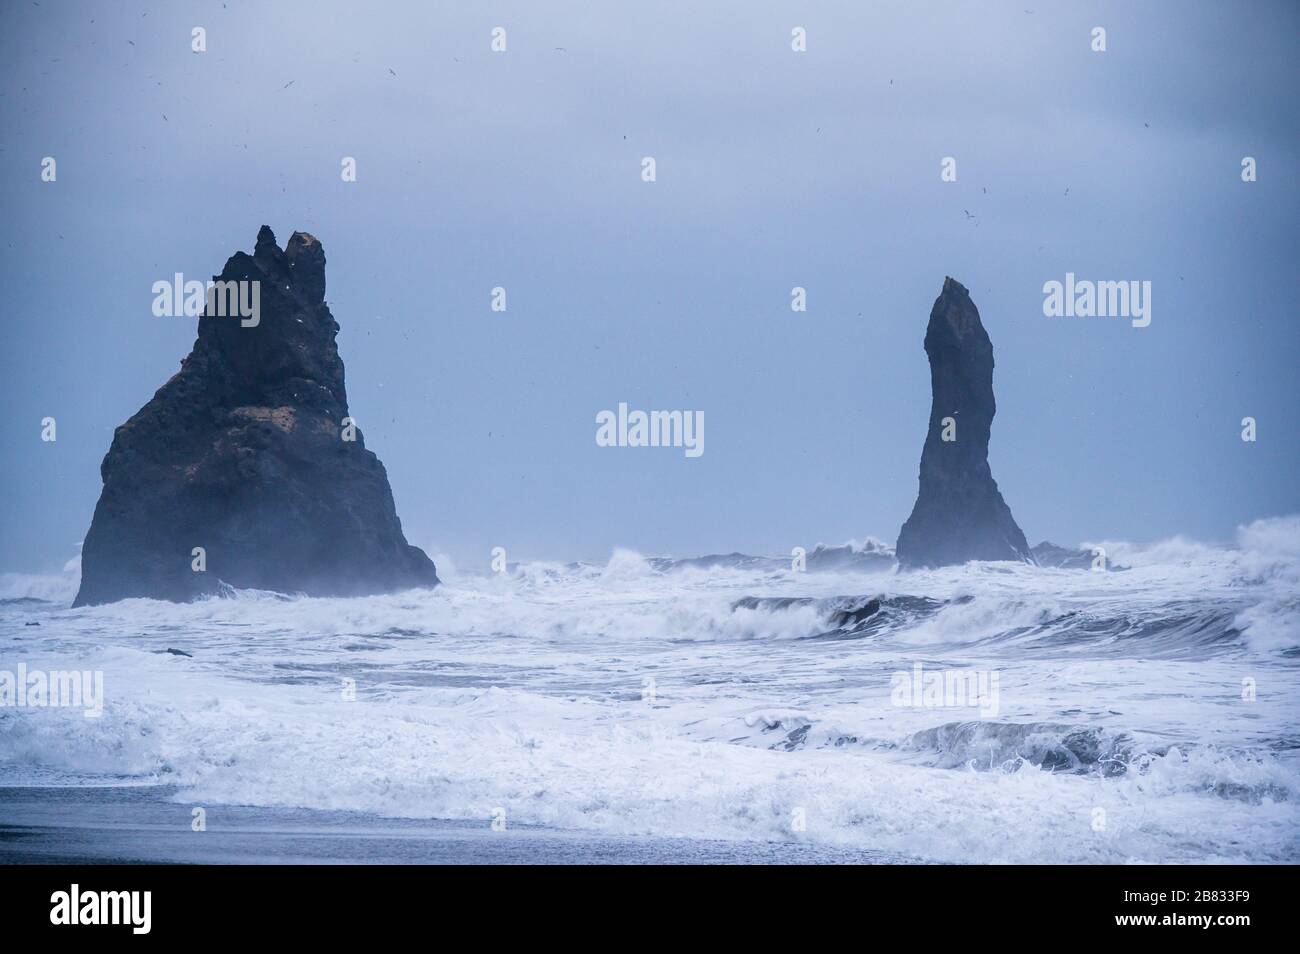 The cliffs off the shore of Reynisfjara. Stock Photo